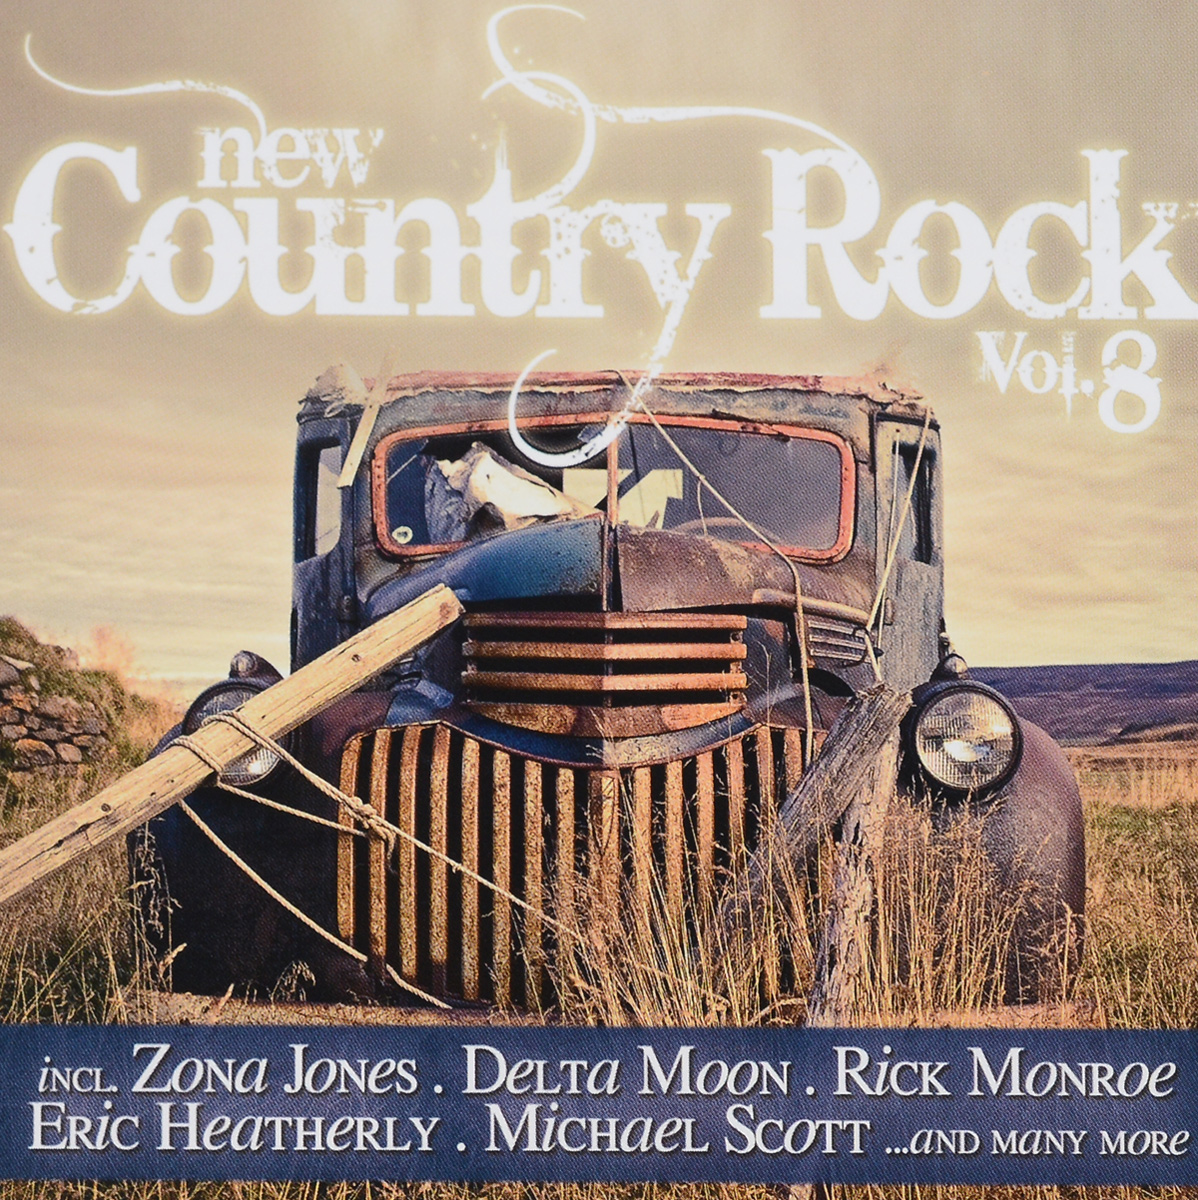 New Country Rock. Vol. 8